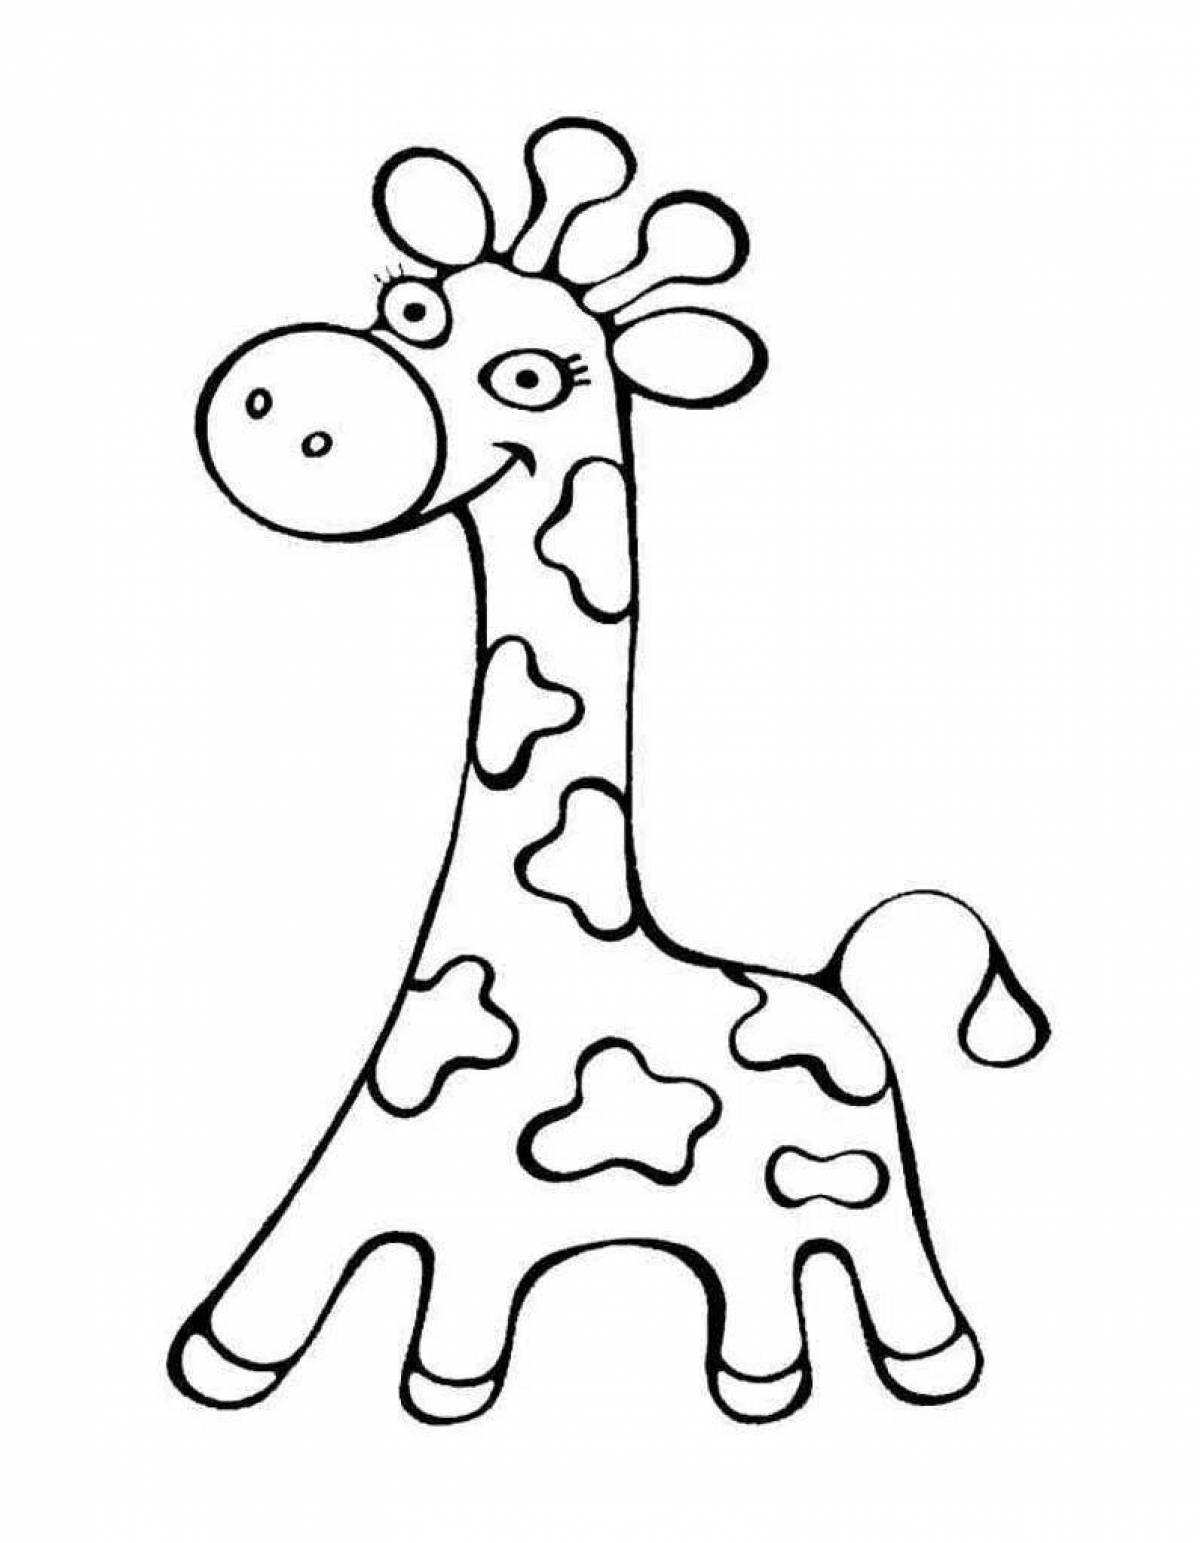 Giraffe coloring pages for kids